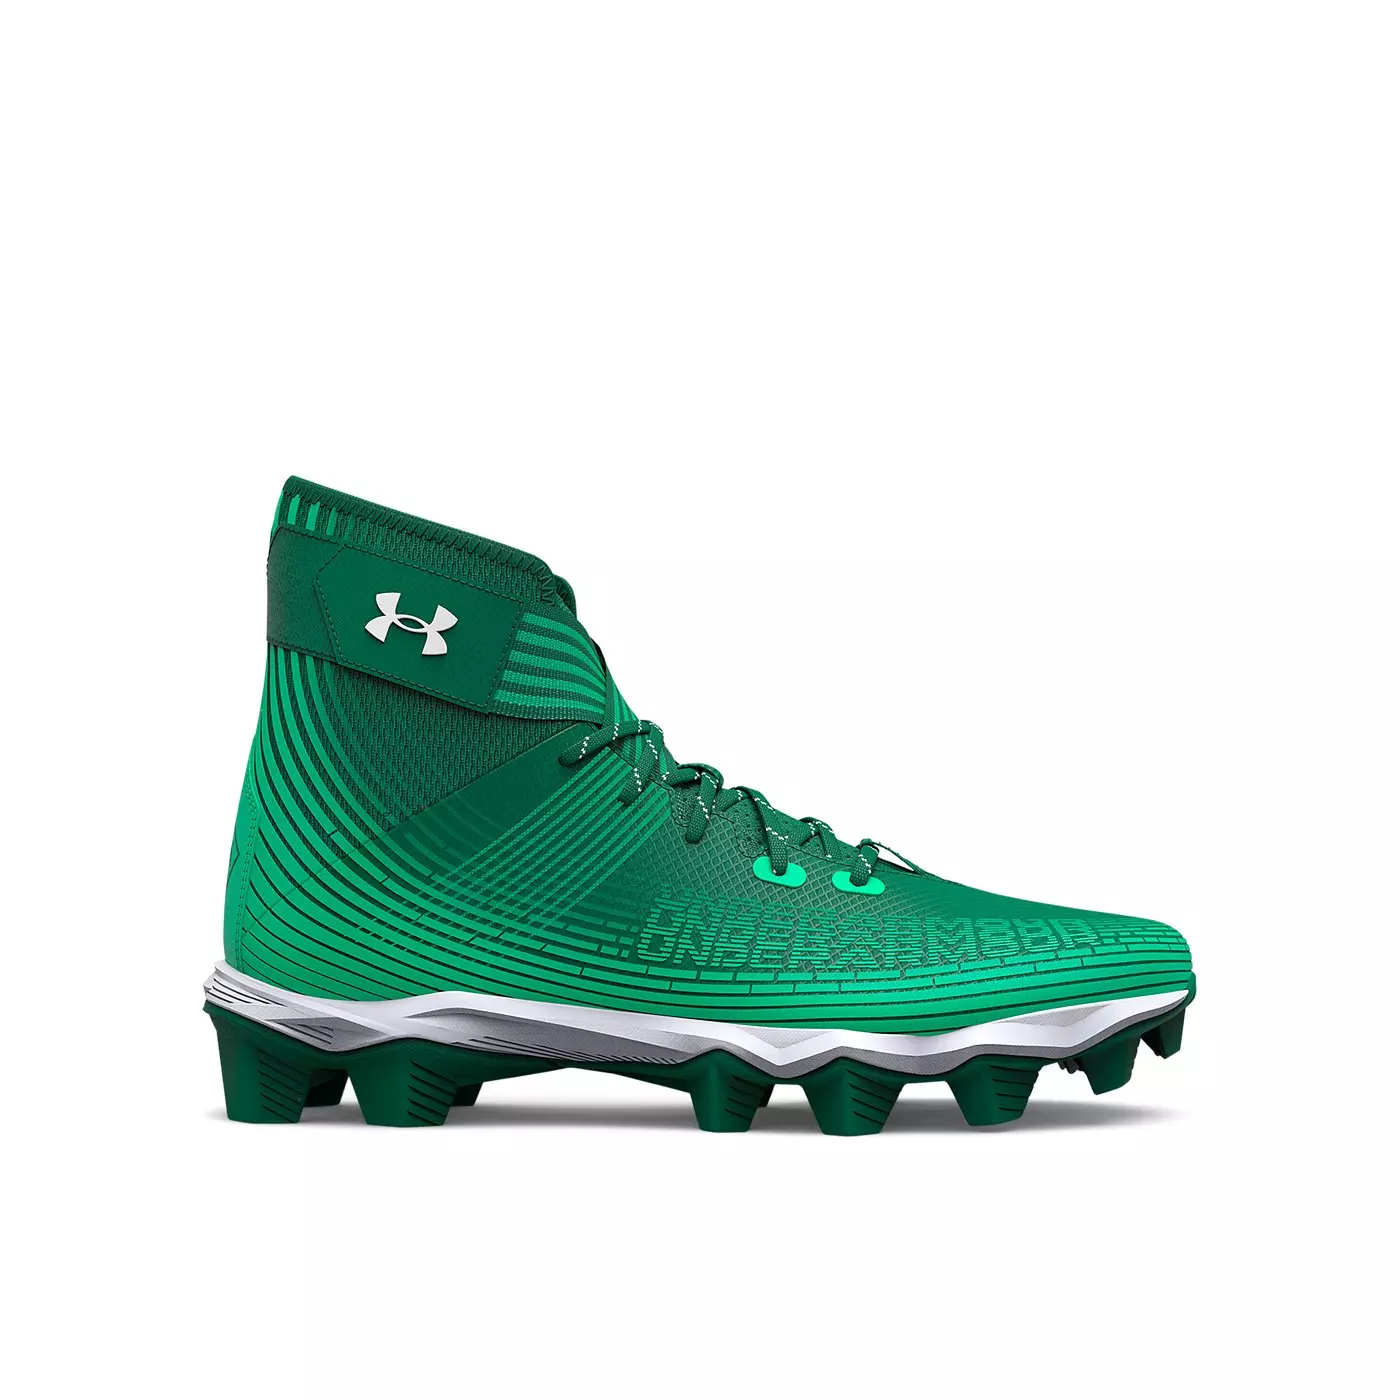 New Men's Size 13 (Women's 14) Molded Cleats Under Armour High Top